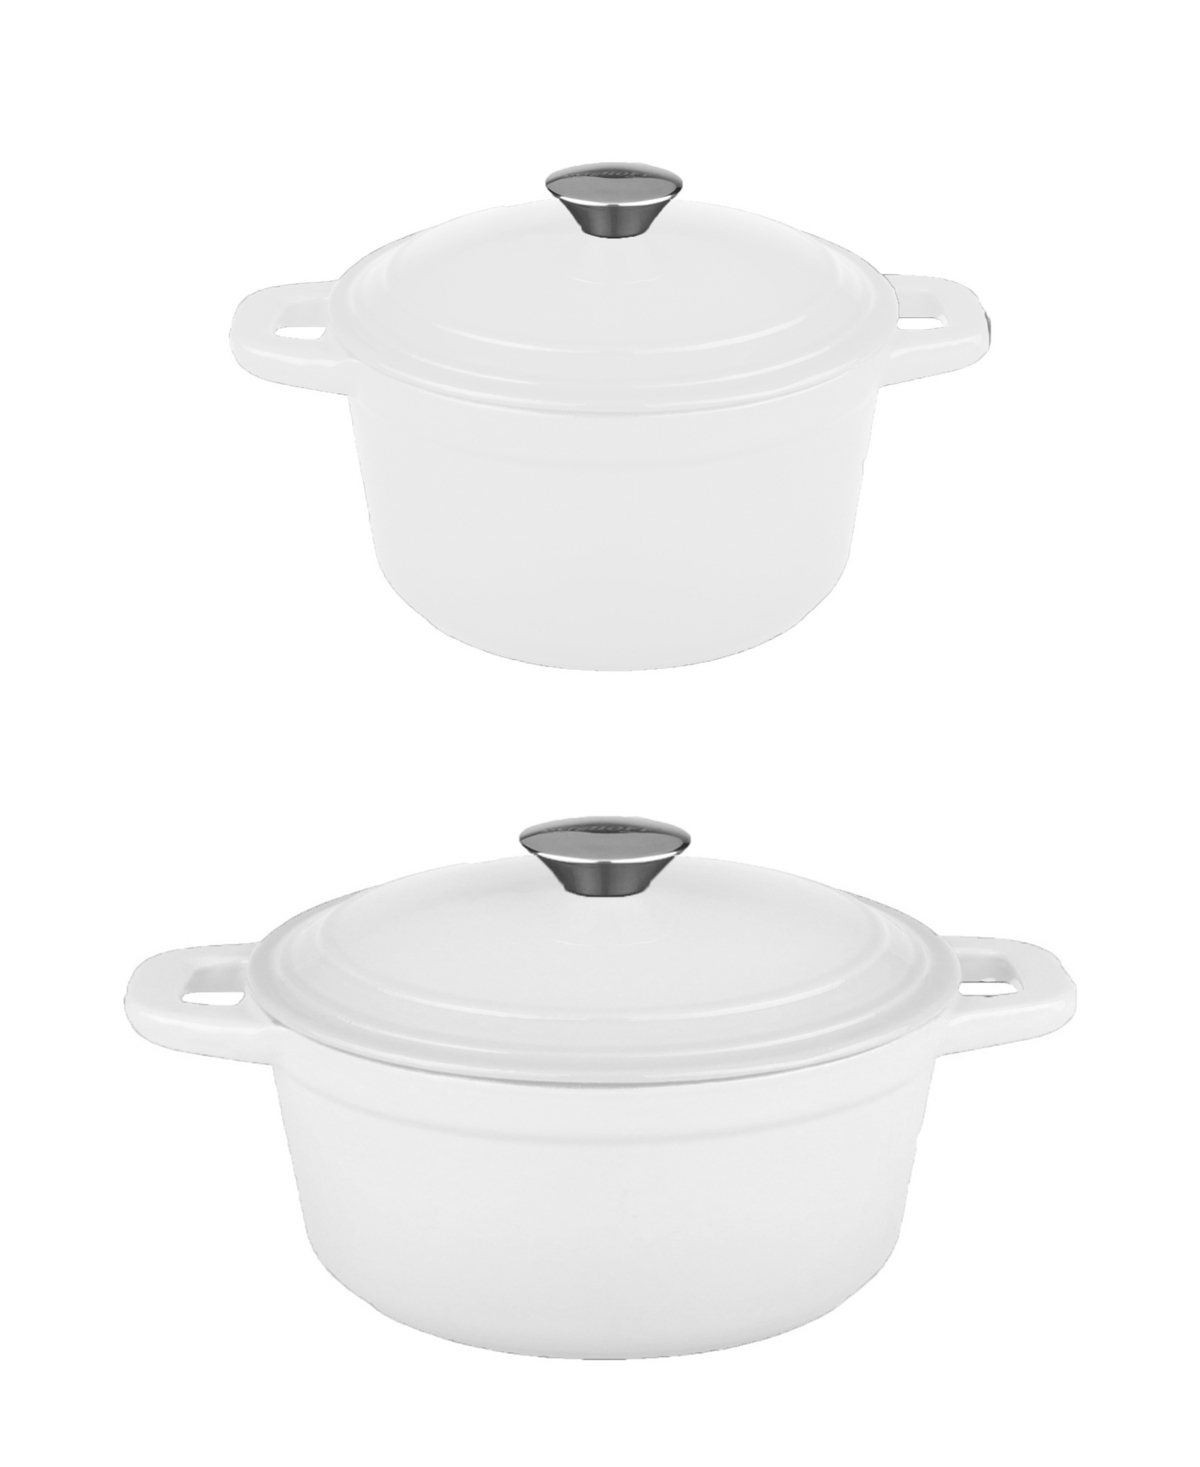 BergHOFF Neo Collection Cast Iron 4-Pc. Cookware Set